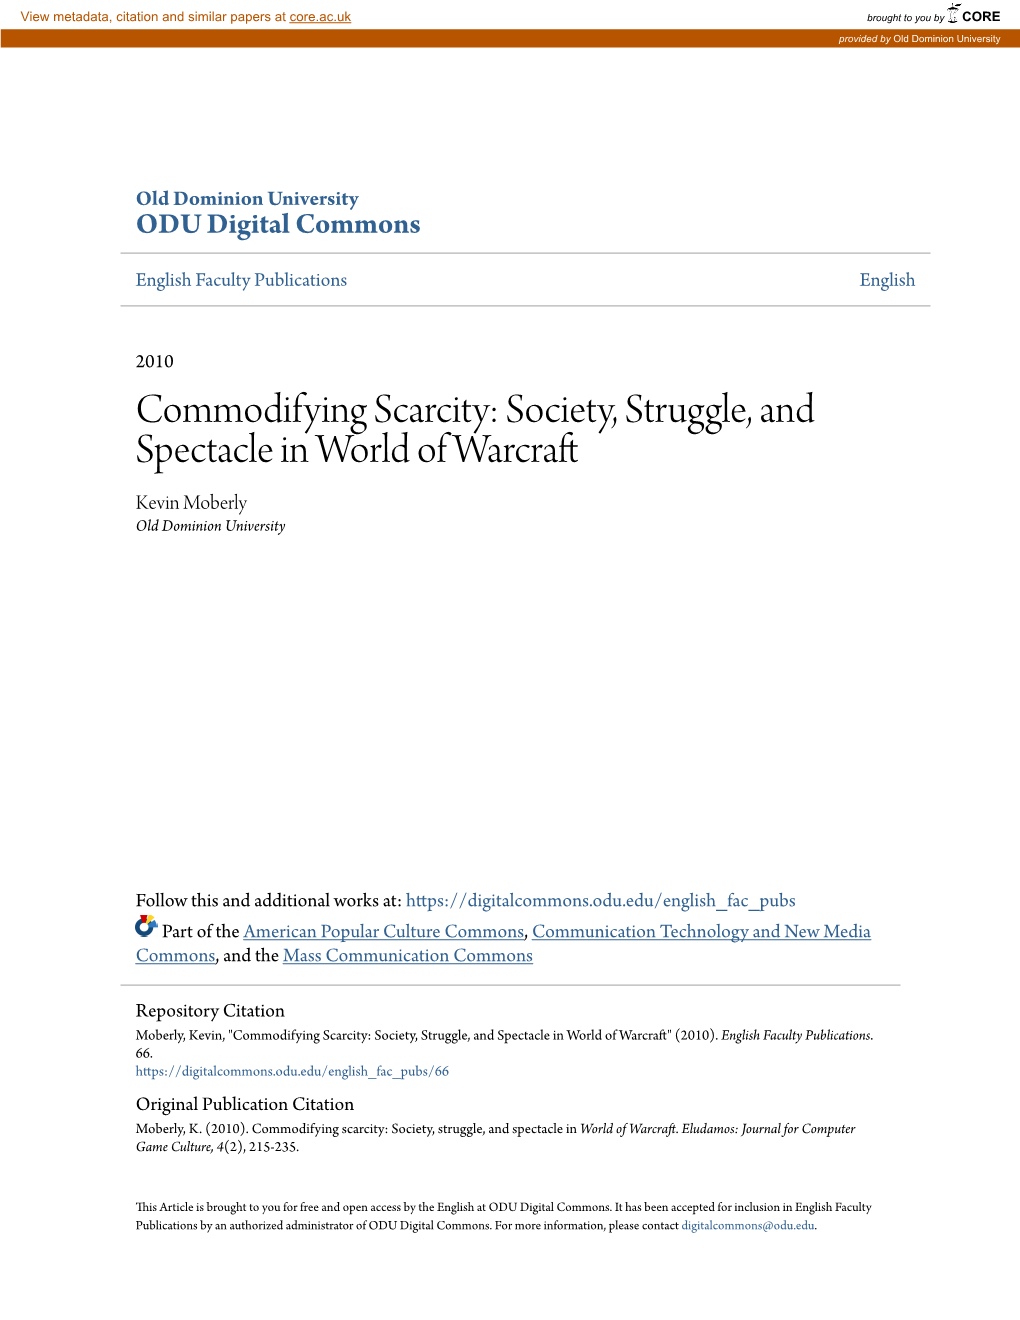 Commodifying Scarcity: Society, Struggle, and Spectacle in World of Warcraft Kevin Moberly Old Dominion University